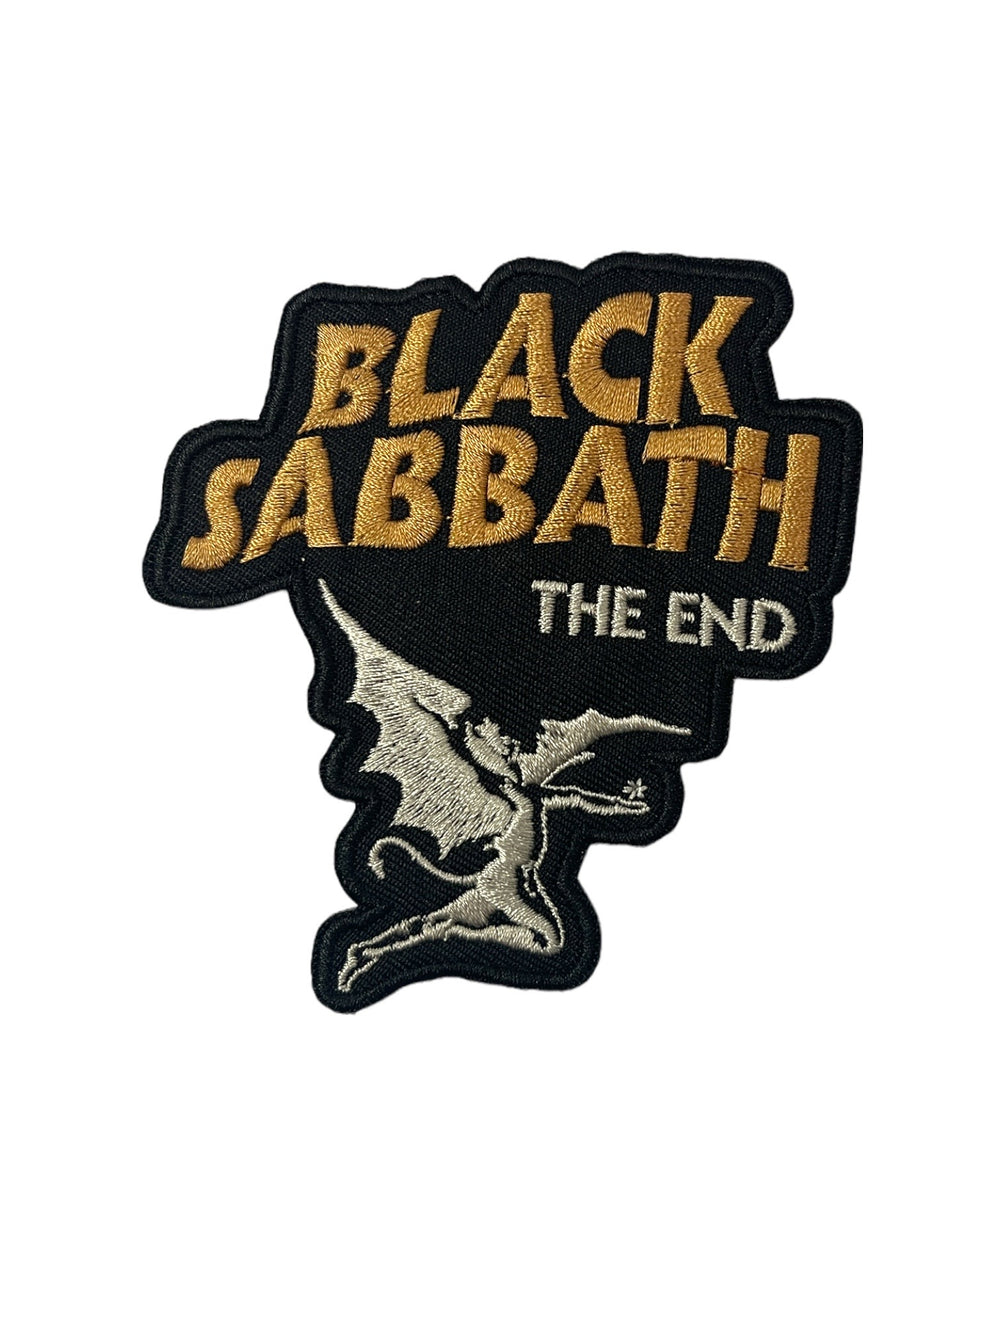 Black Sabbath Standard Patch: The End Official Woven Patch Brand New